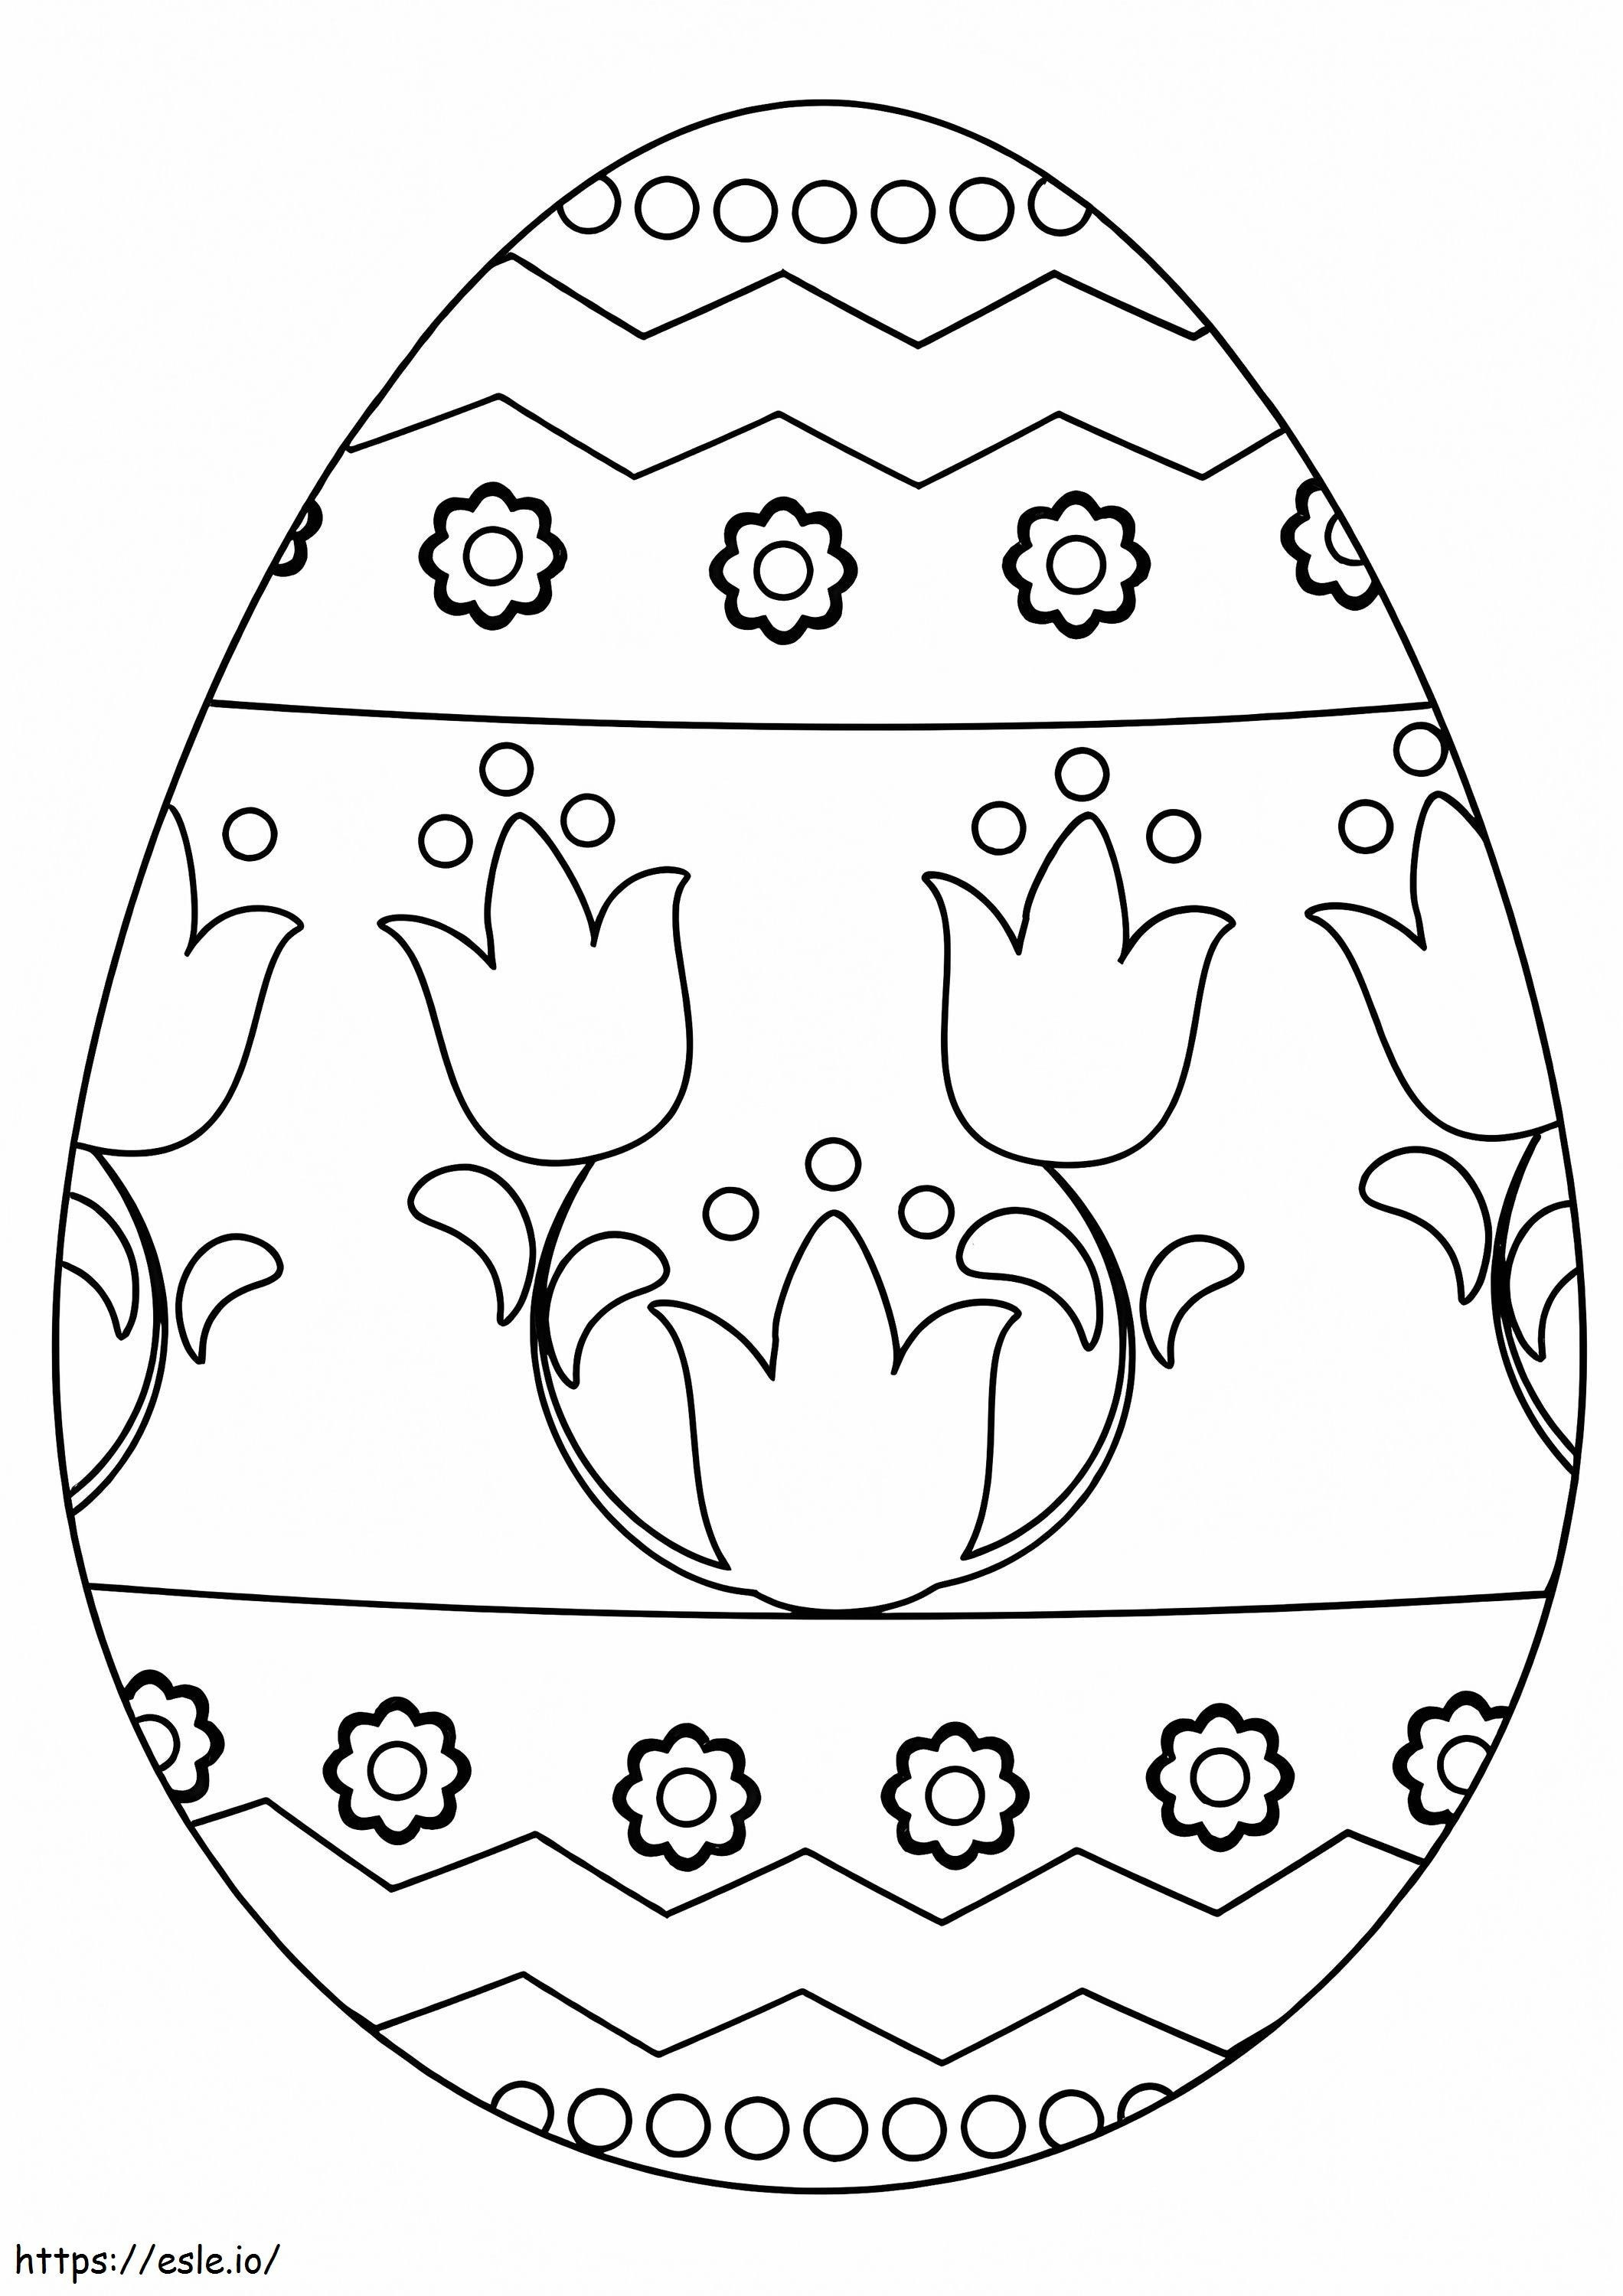 Nice Easter Egg 5 coloring page